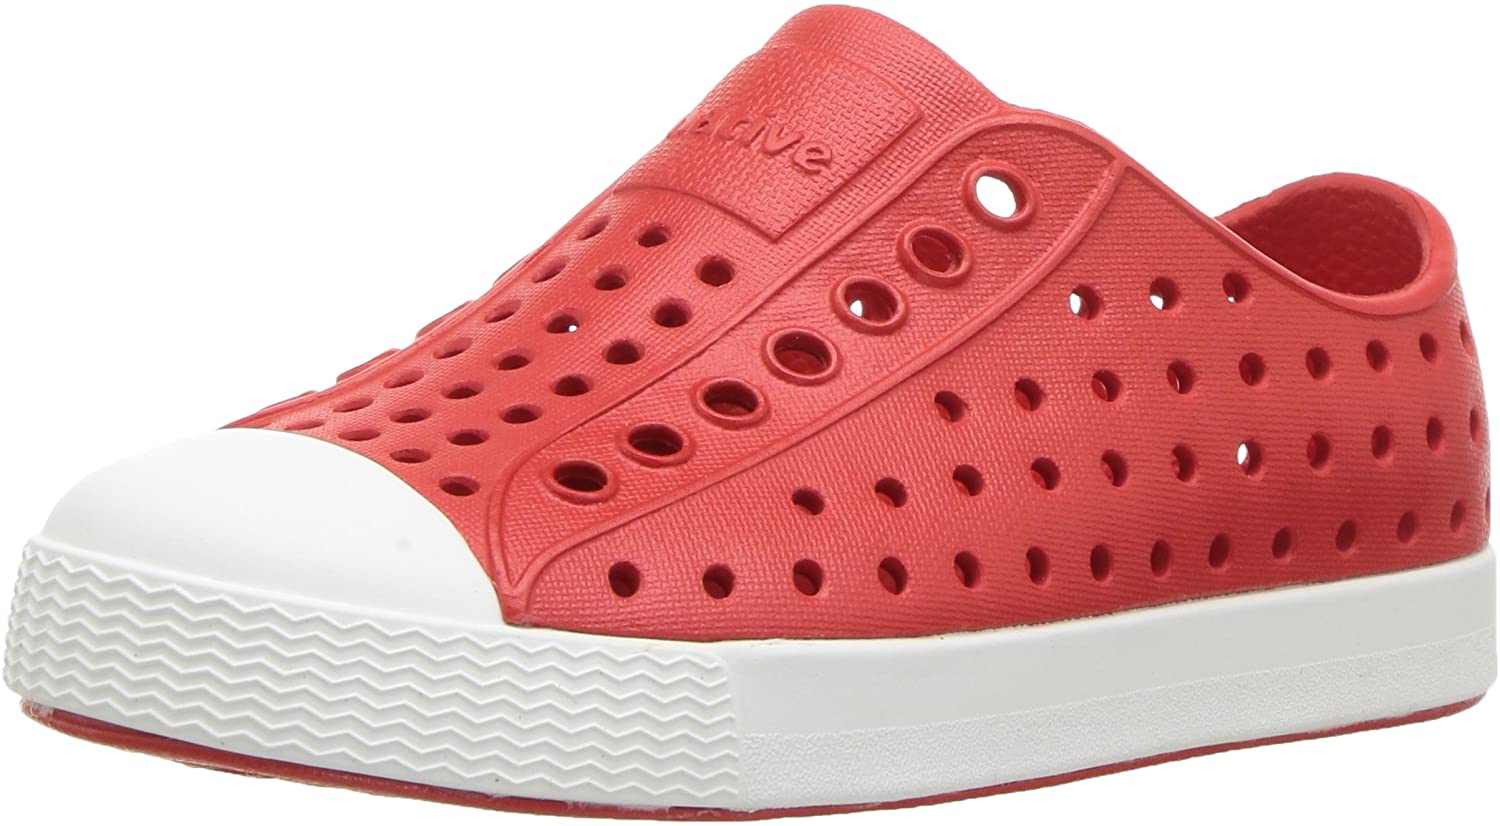 19 Durable Kids' Shoes You Can Buy Online